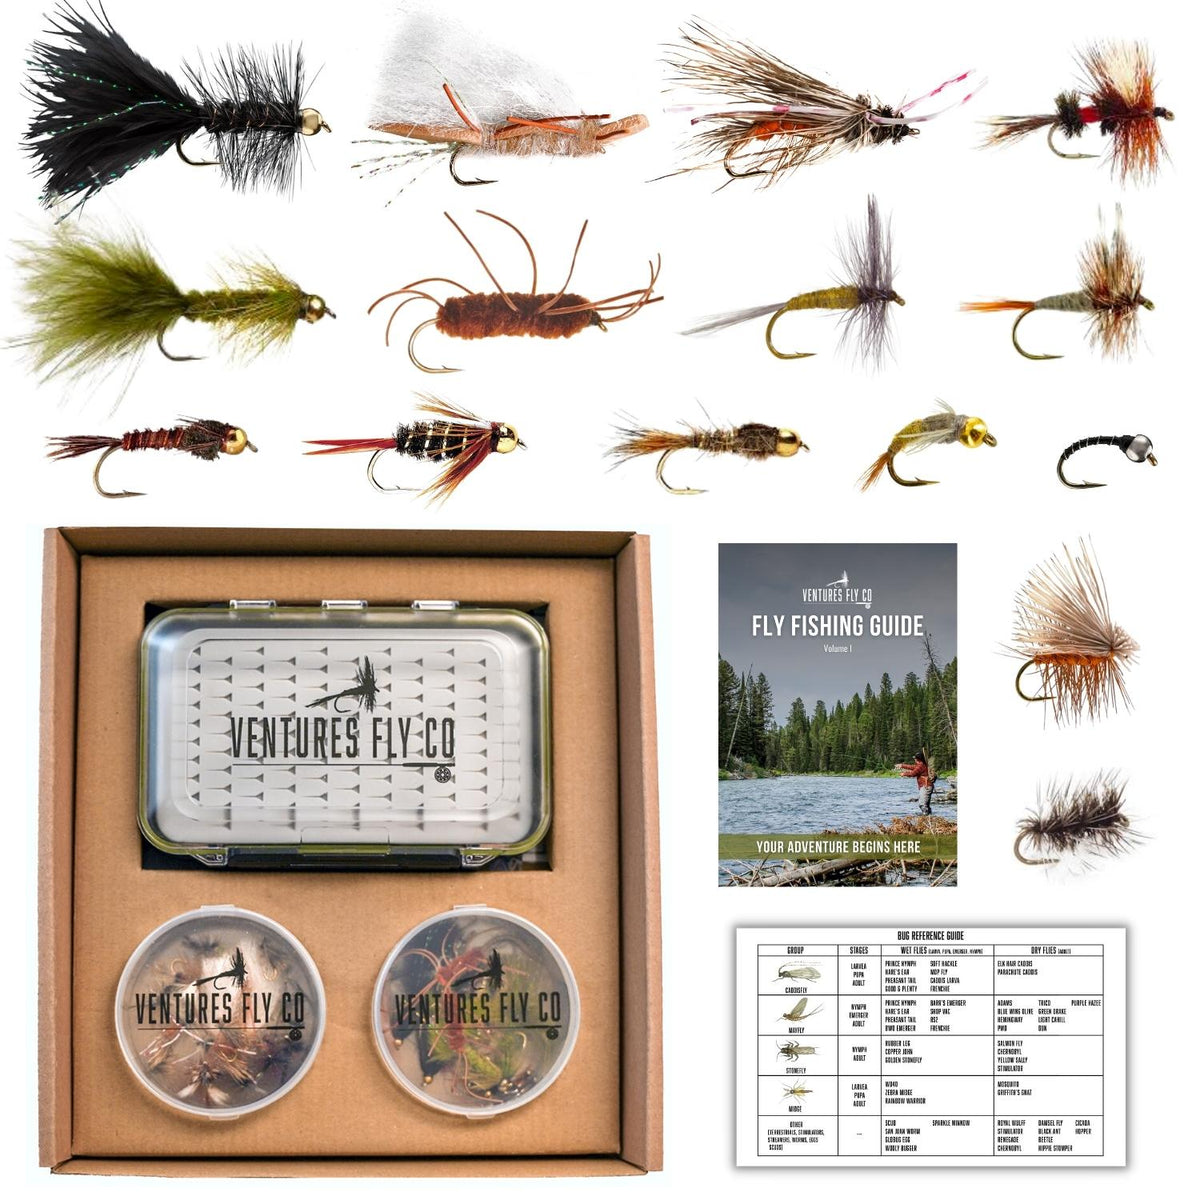 The Essential Dry Fly Collection - 12 Goat Float Flies, 5X Leader